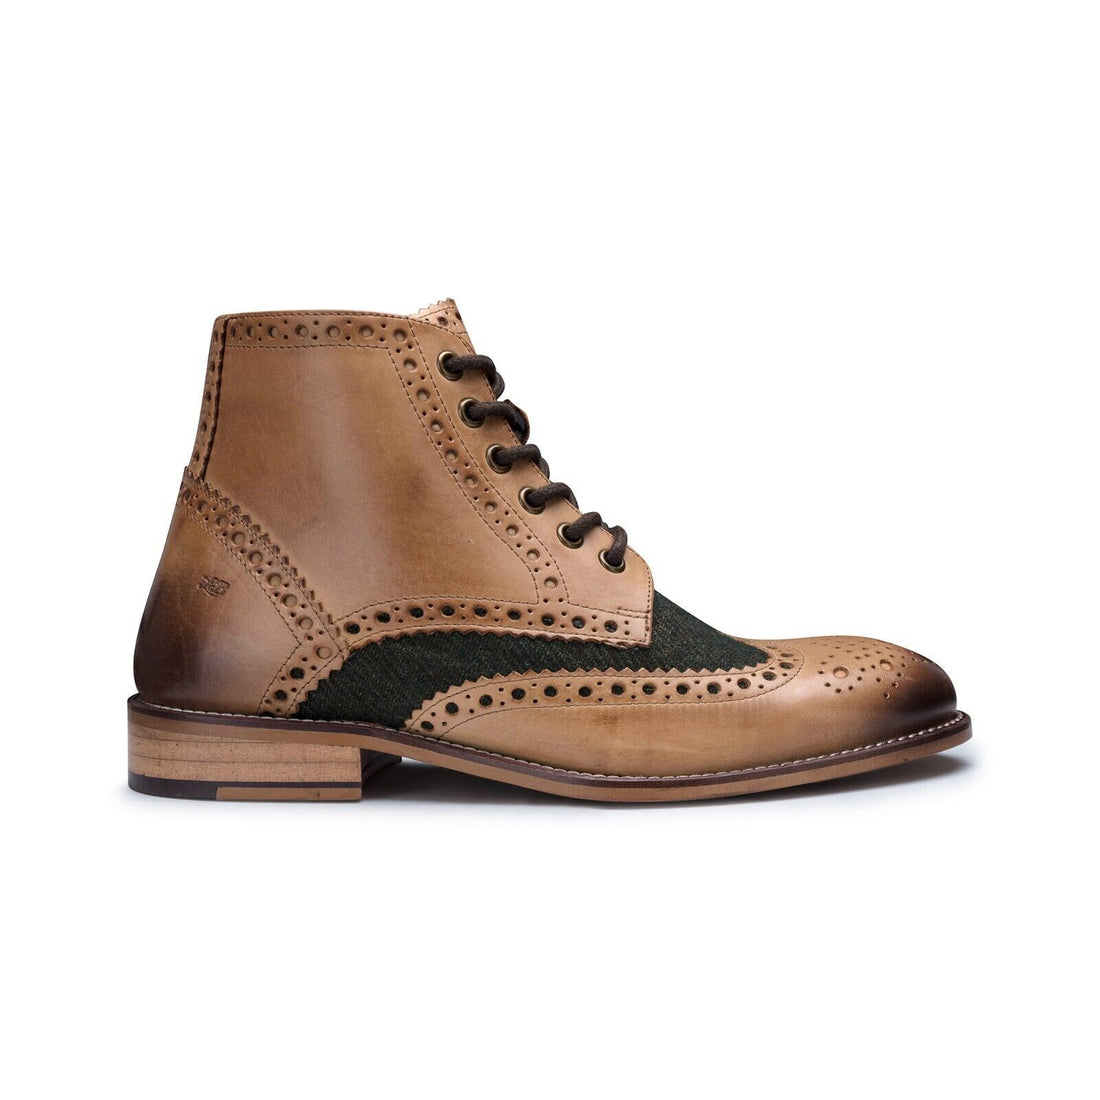 Mens Classic Oxford Tan Leather Gatsby Brogue Ankle Boots with Green Tweed - Upperclass Fashions 